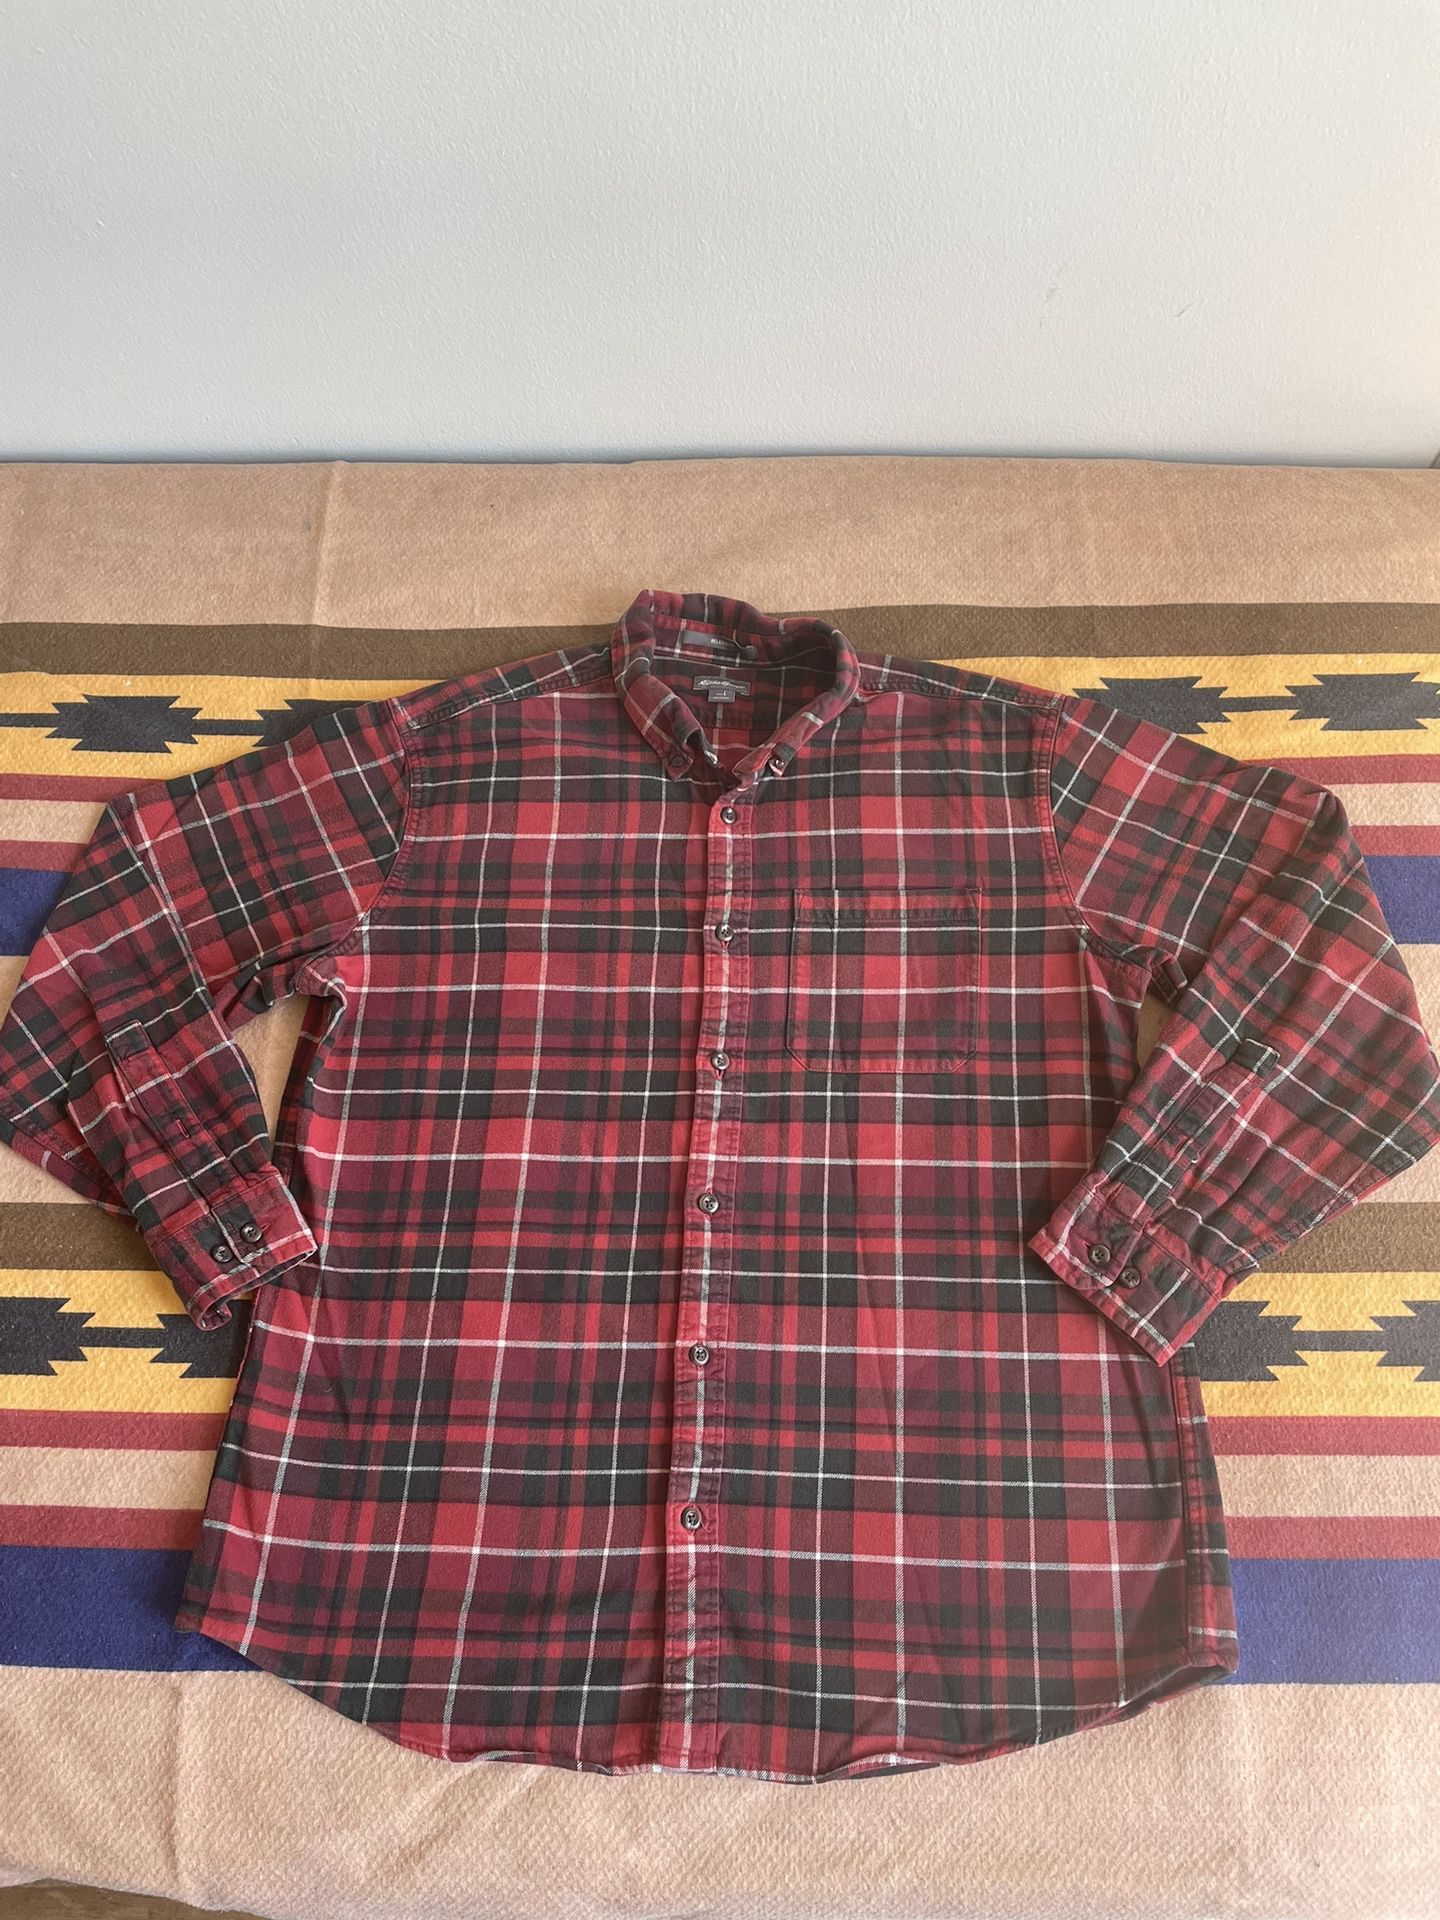 Eddie Bauer Men’s Large Relaxed Fit Red/Green Plaid Flannel.